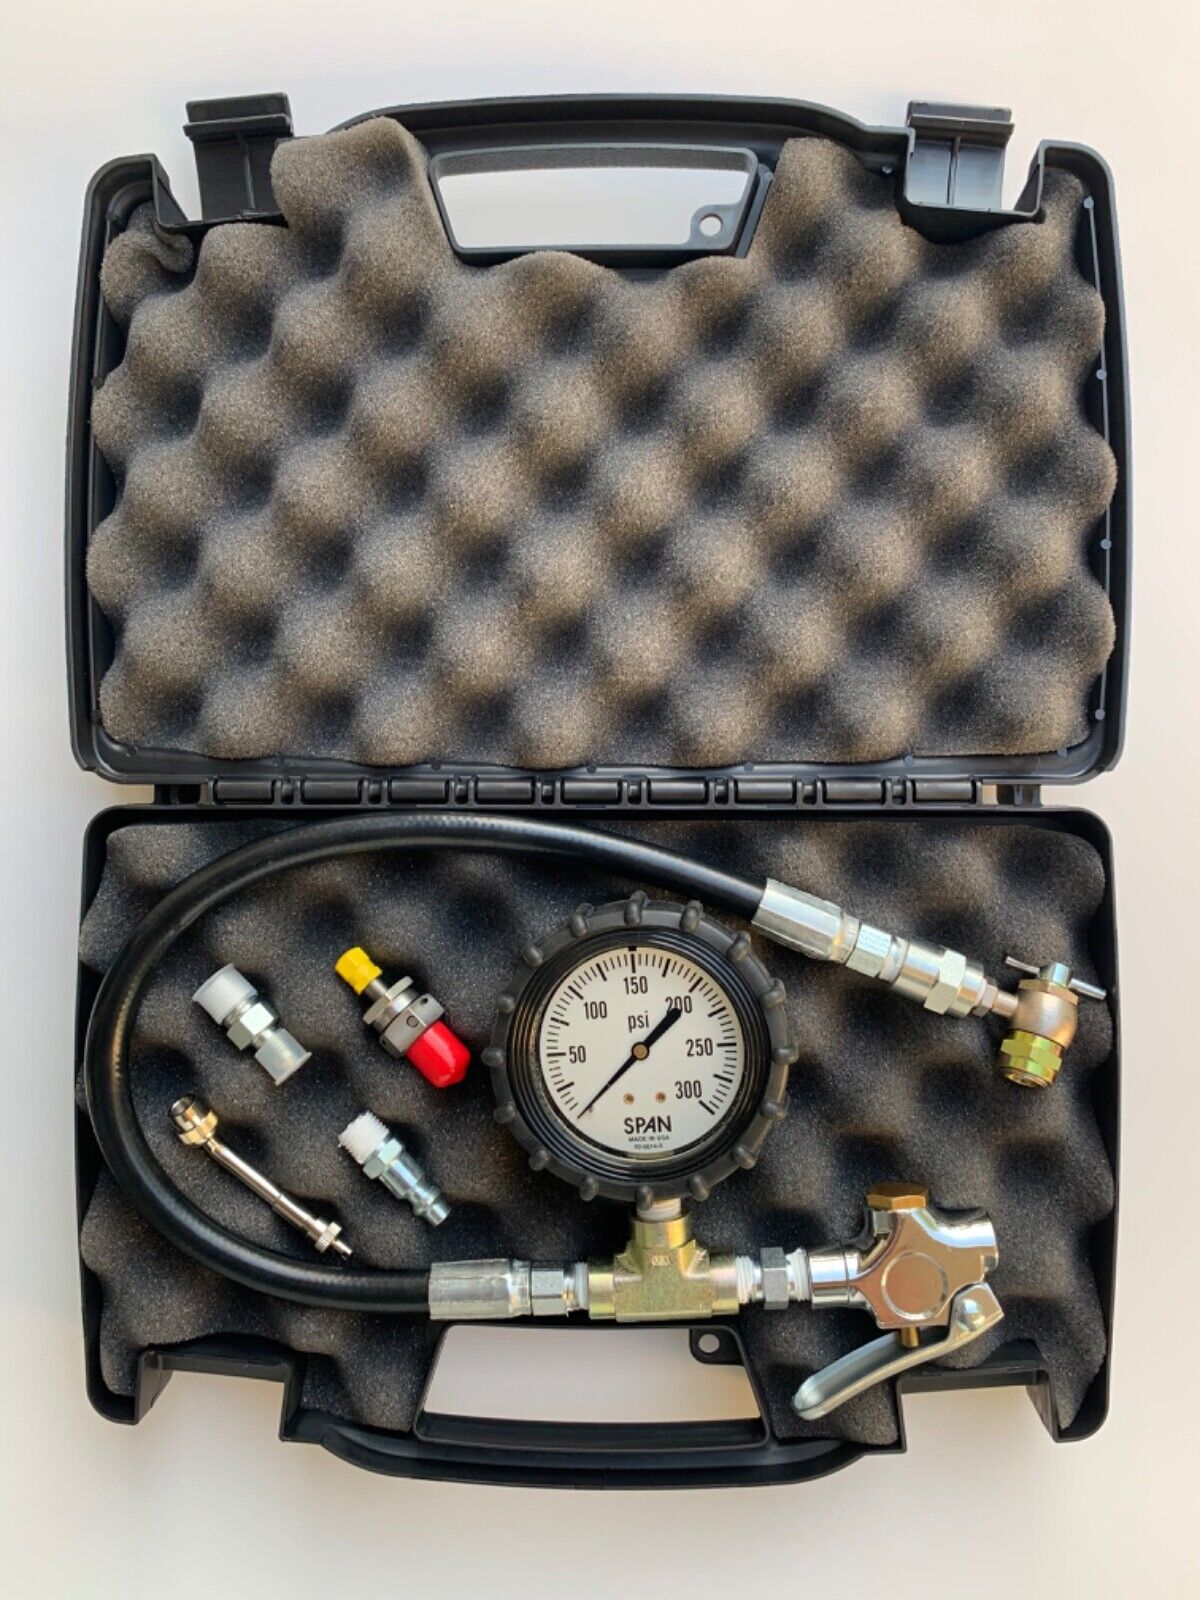 TA 14-6807-6011 Tire Service Kit Tire Pressure Gauge with accessories USA Made